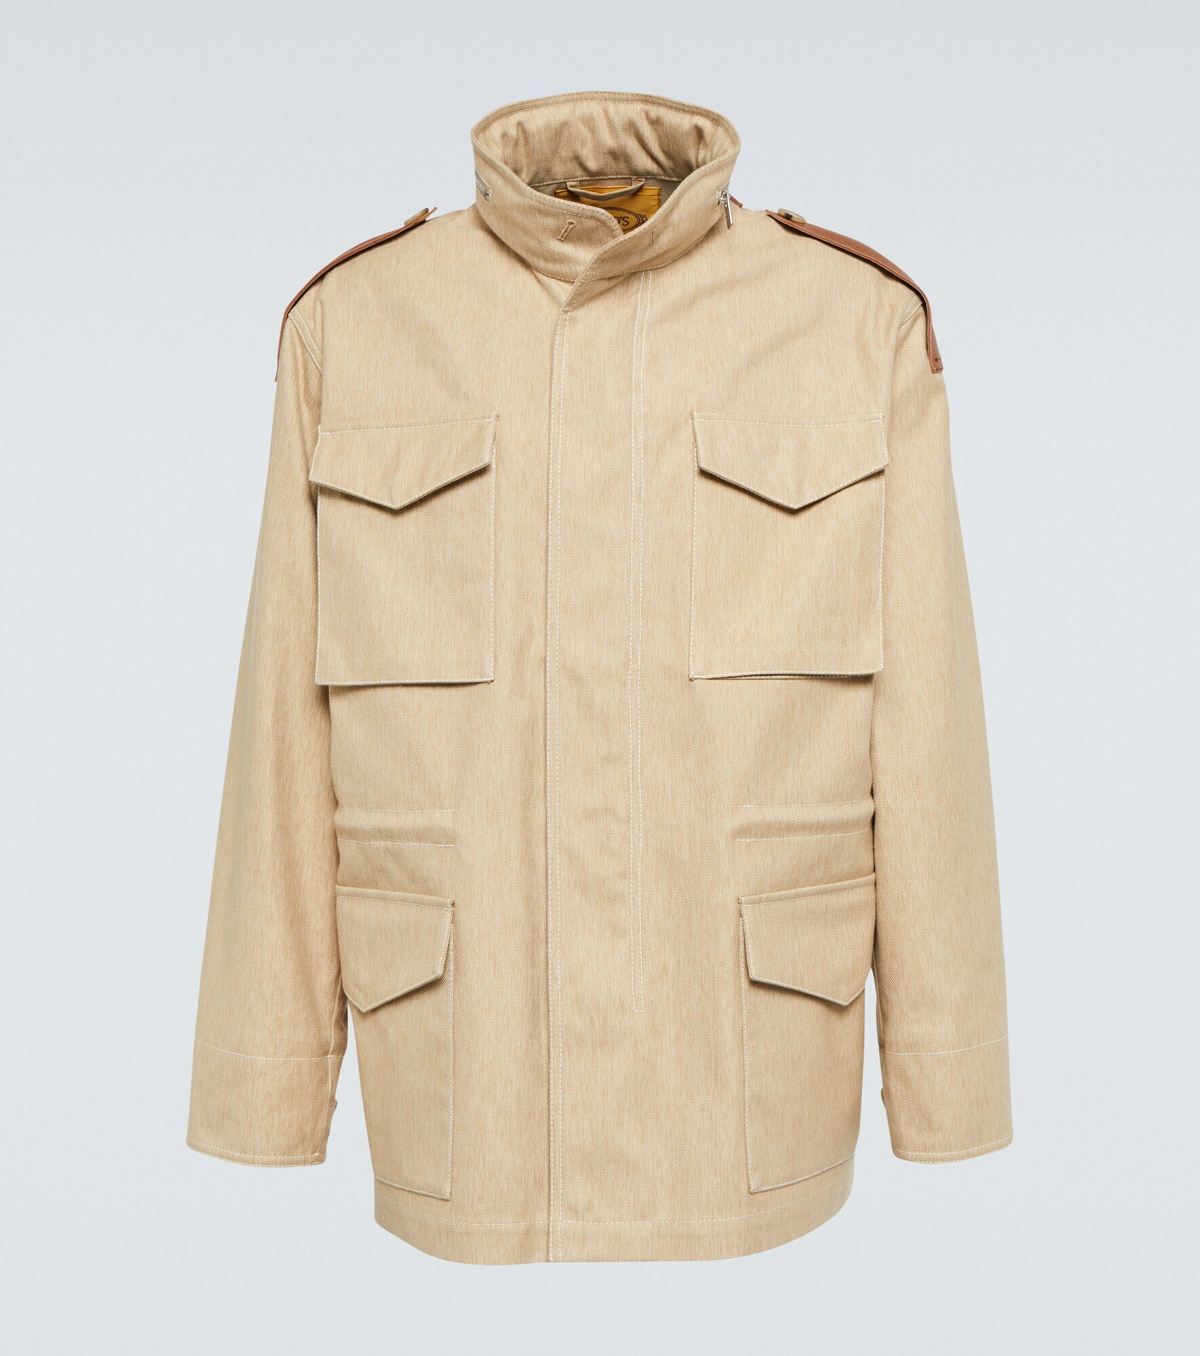 Tod's - Sahariana Washed Cotton and Linen-Blend Field Jacket - Beige